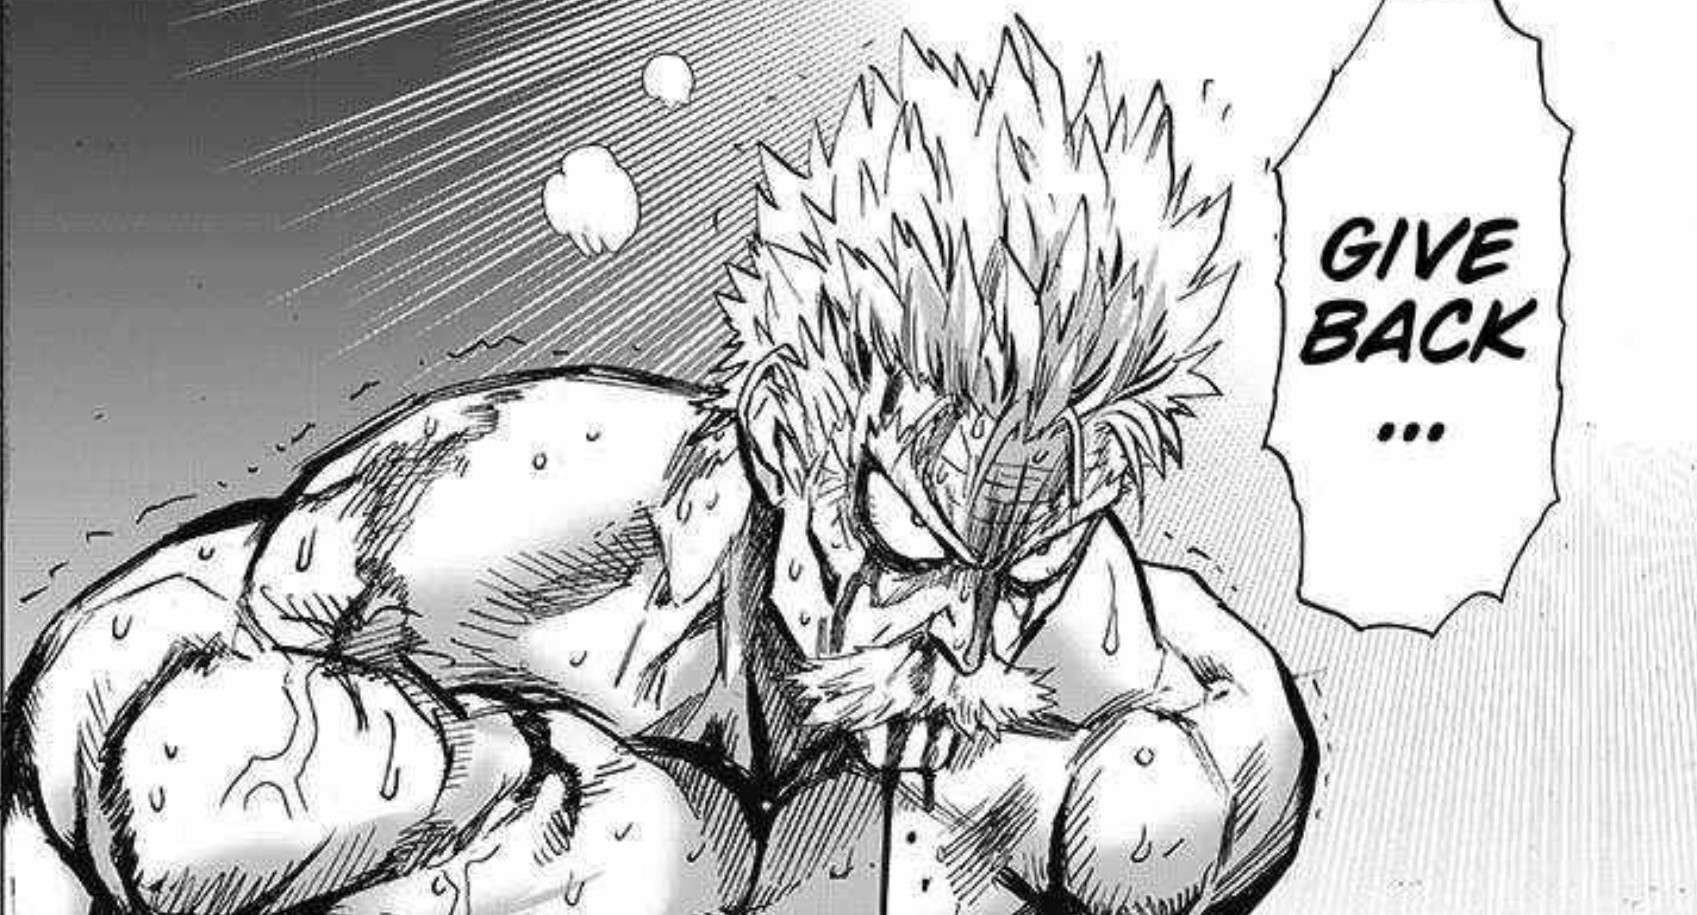 One-Punch Man, Chapter 167 - One-Punch Man Manga Online